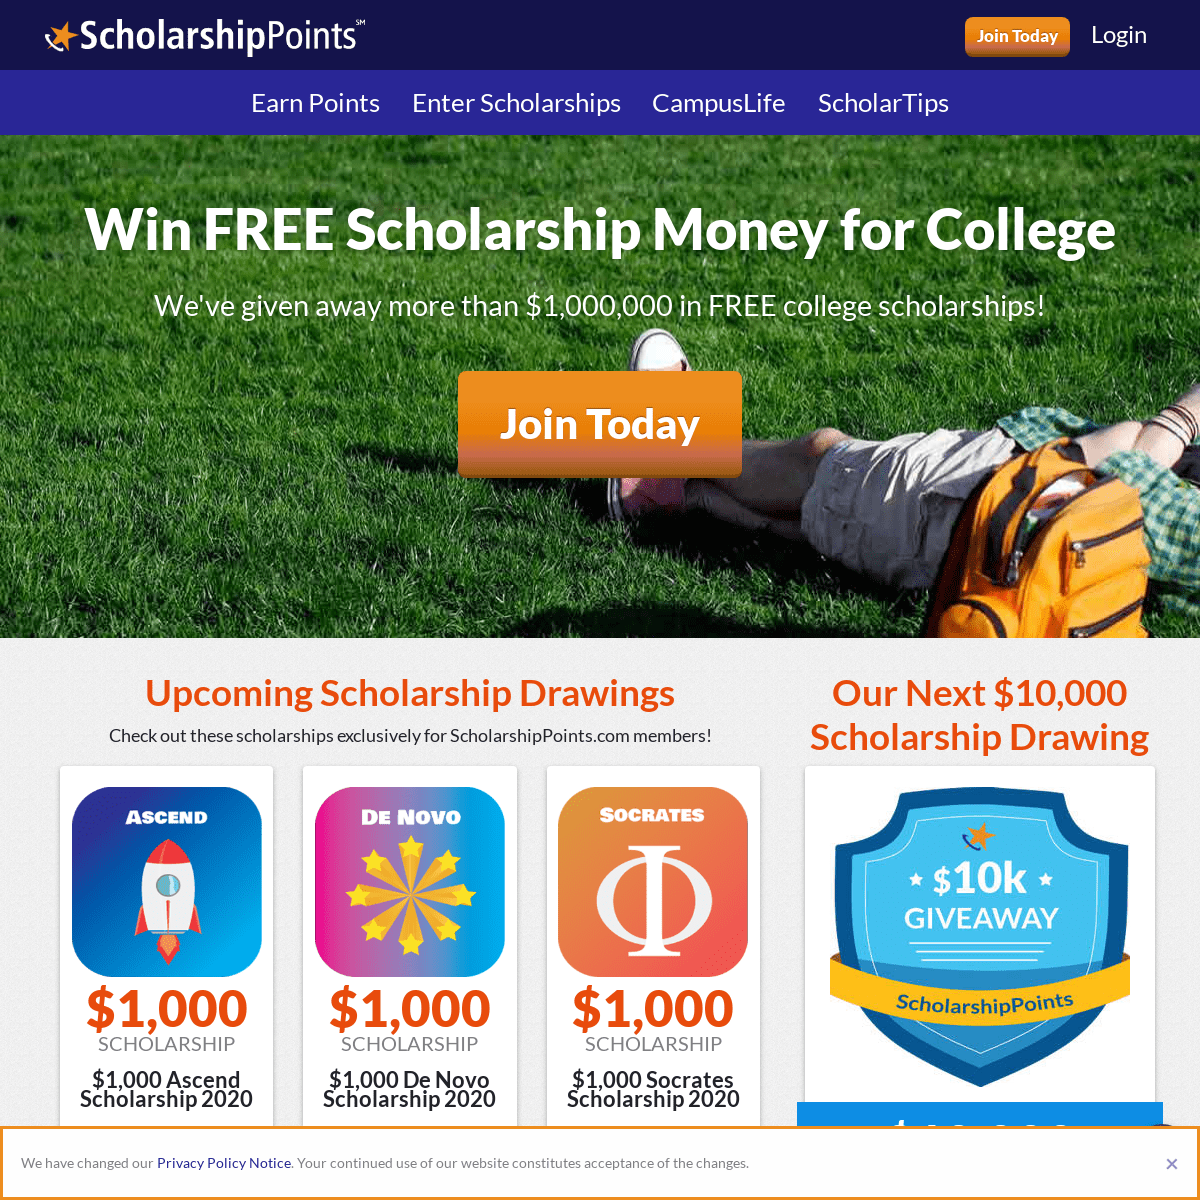 A complete backup of scholarshippoints.com